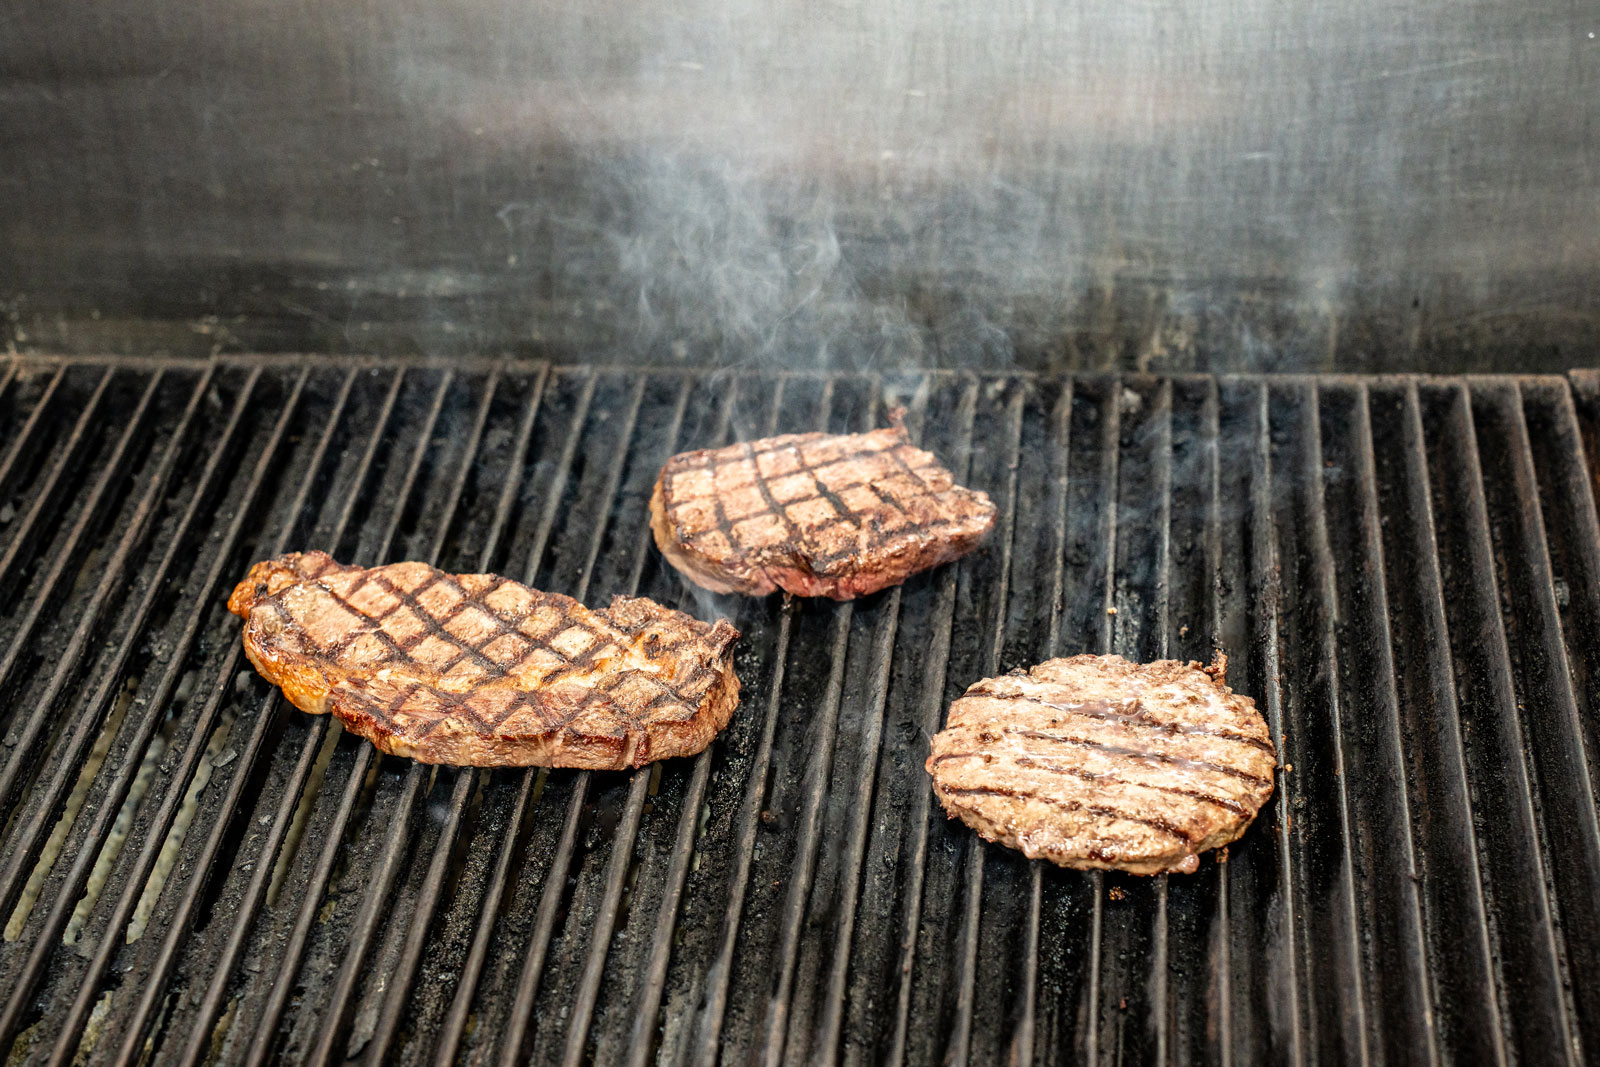 Meat on the grill at G&D Steakhouse